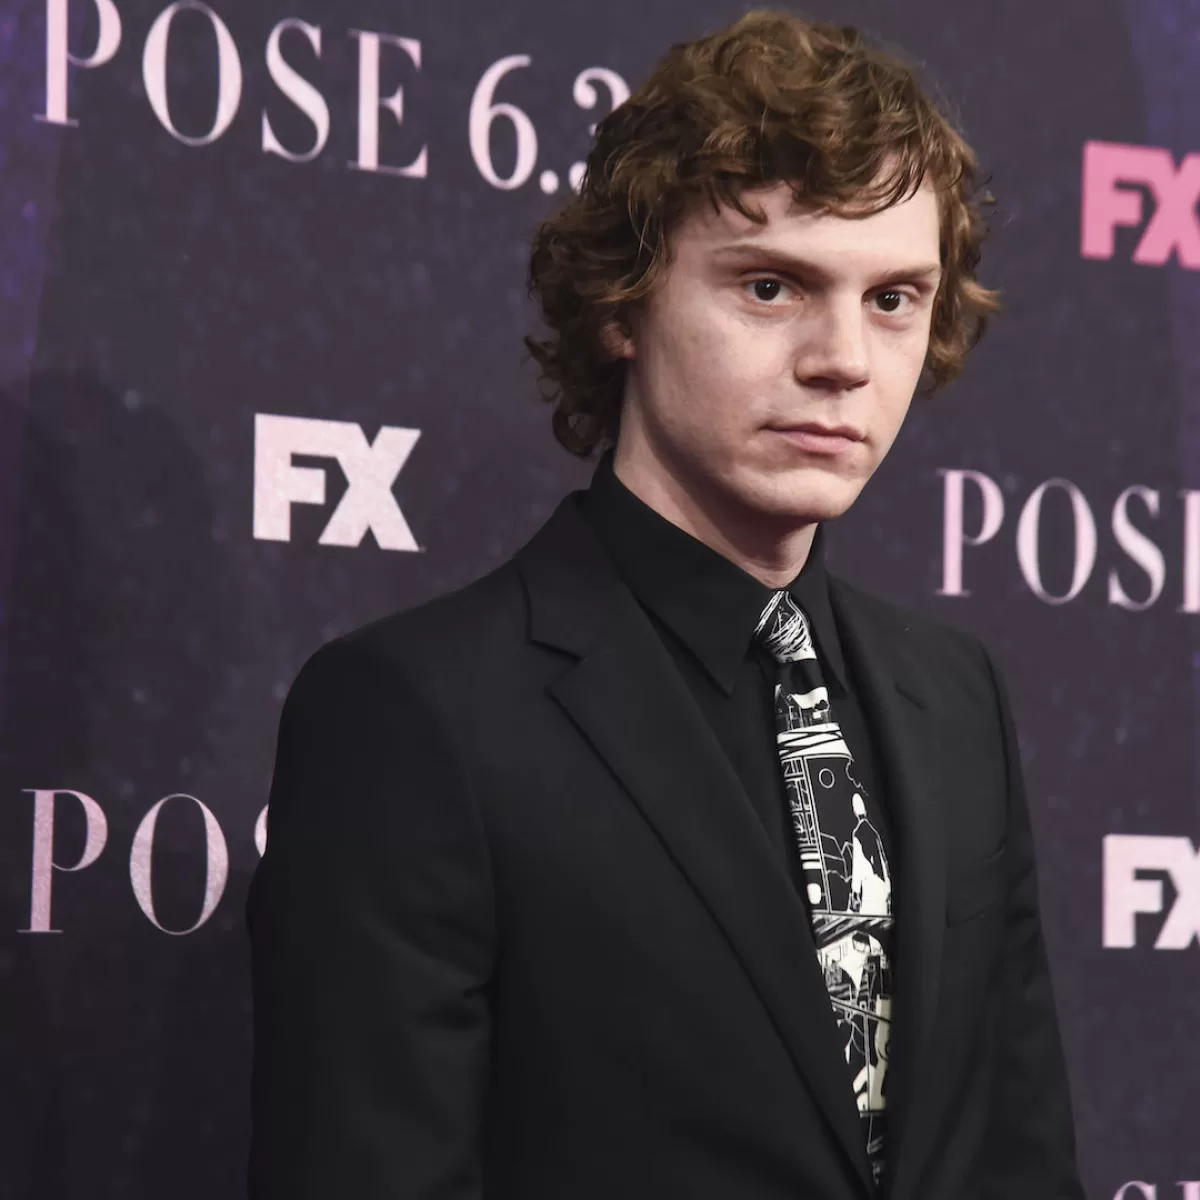 Evan Peters Movies and TV Shows